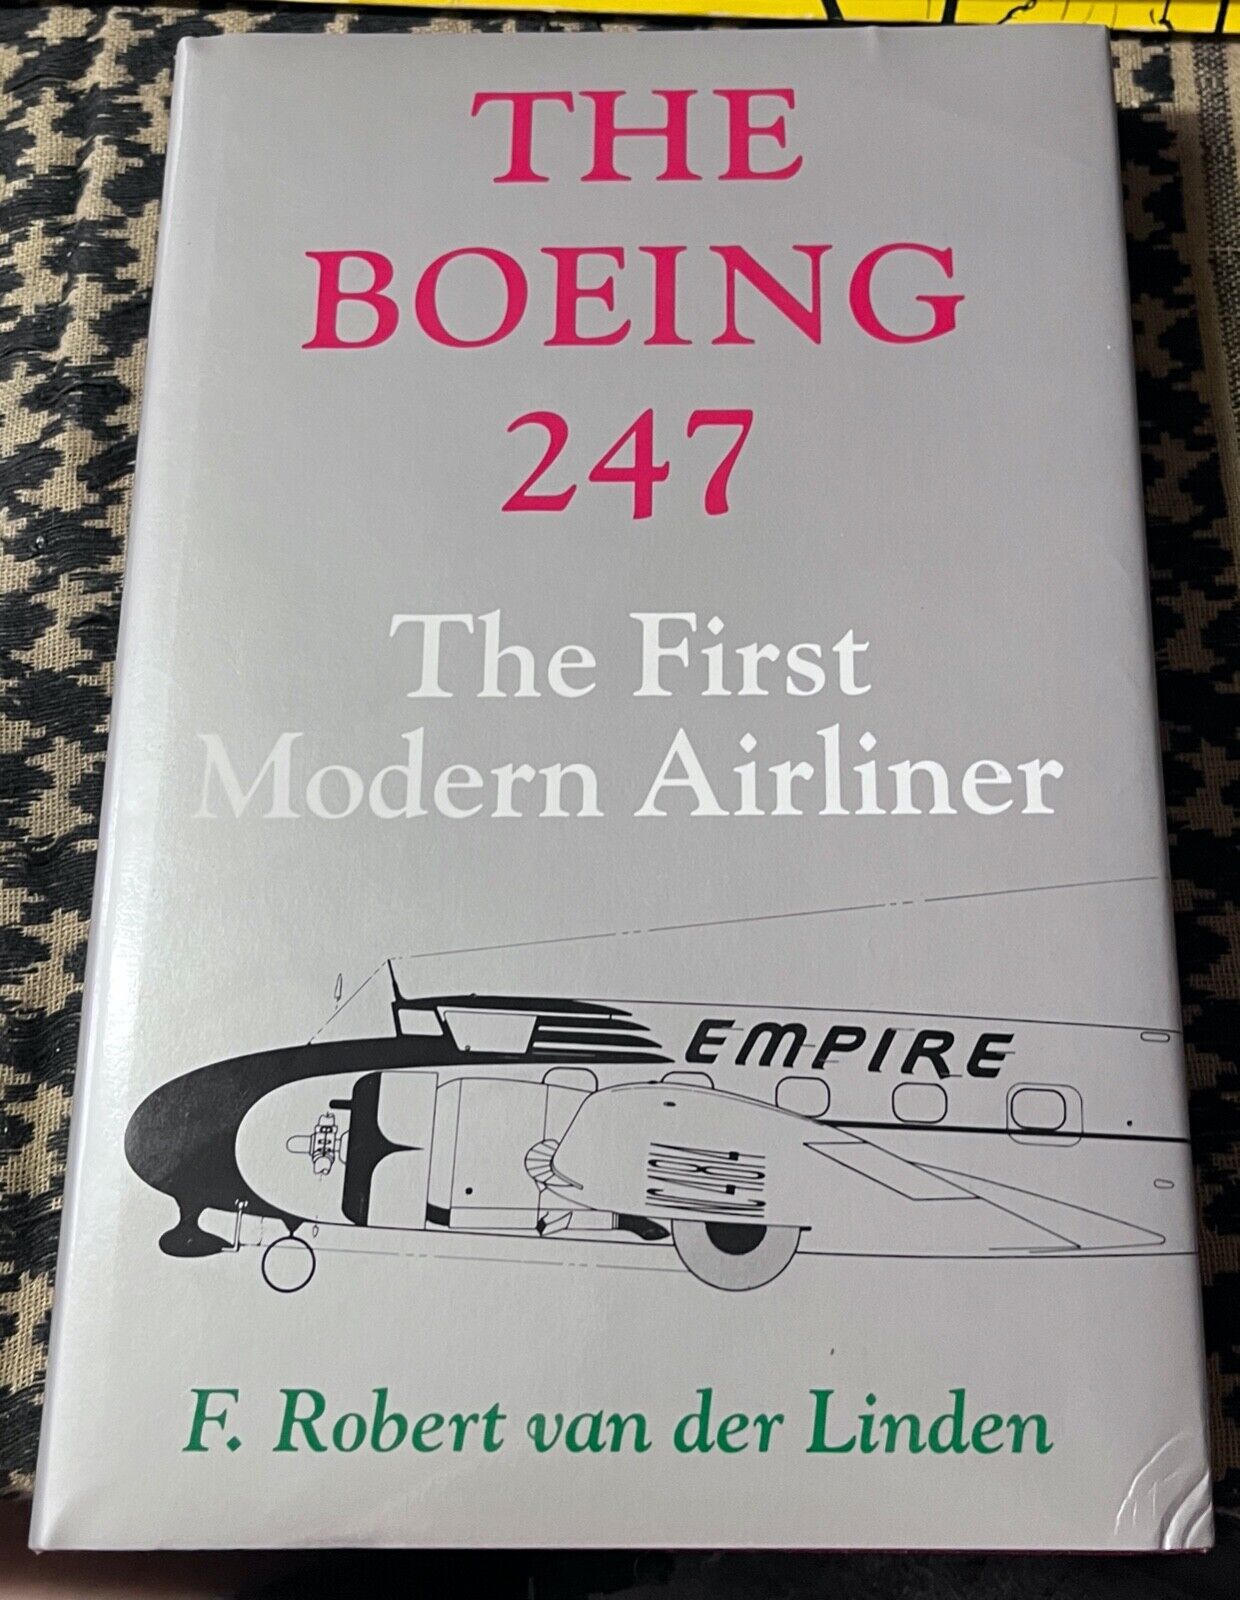 BOEING 247: FIRST MODERN AIRLINER AIR RACER By Der Linden FREE USA SHIPPING